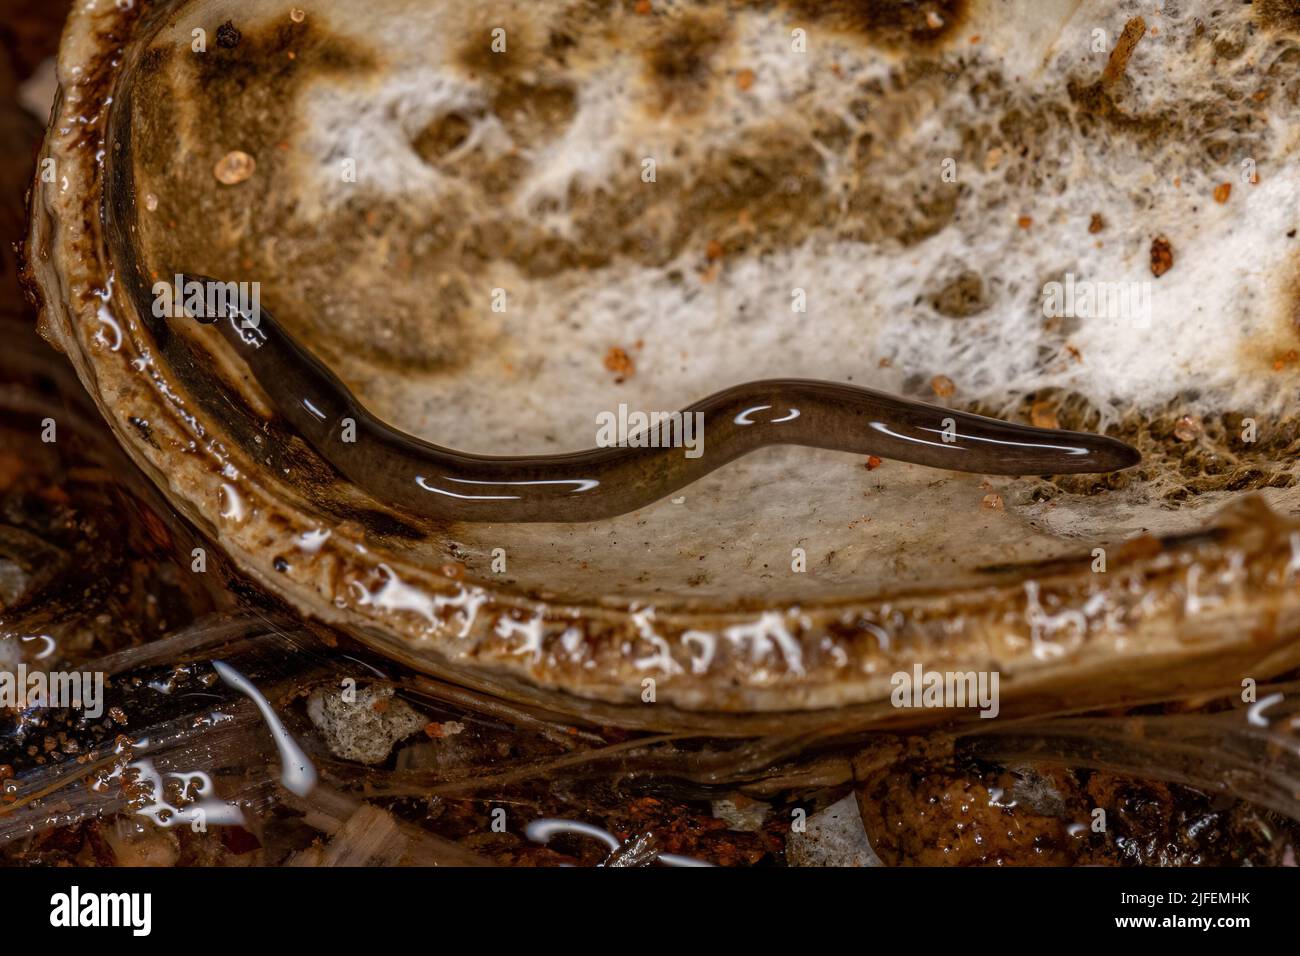 Small Land Planarian Animal of the Family Geoplanidae Stock Photo